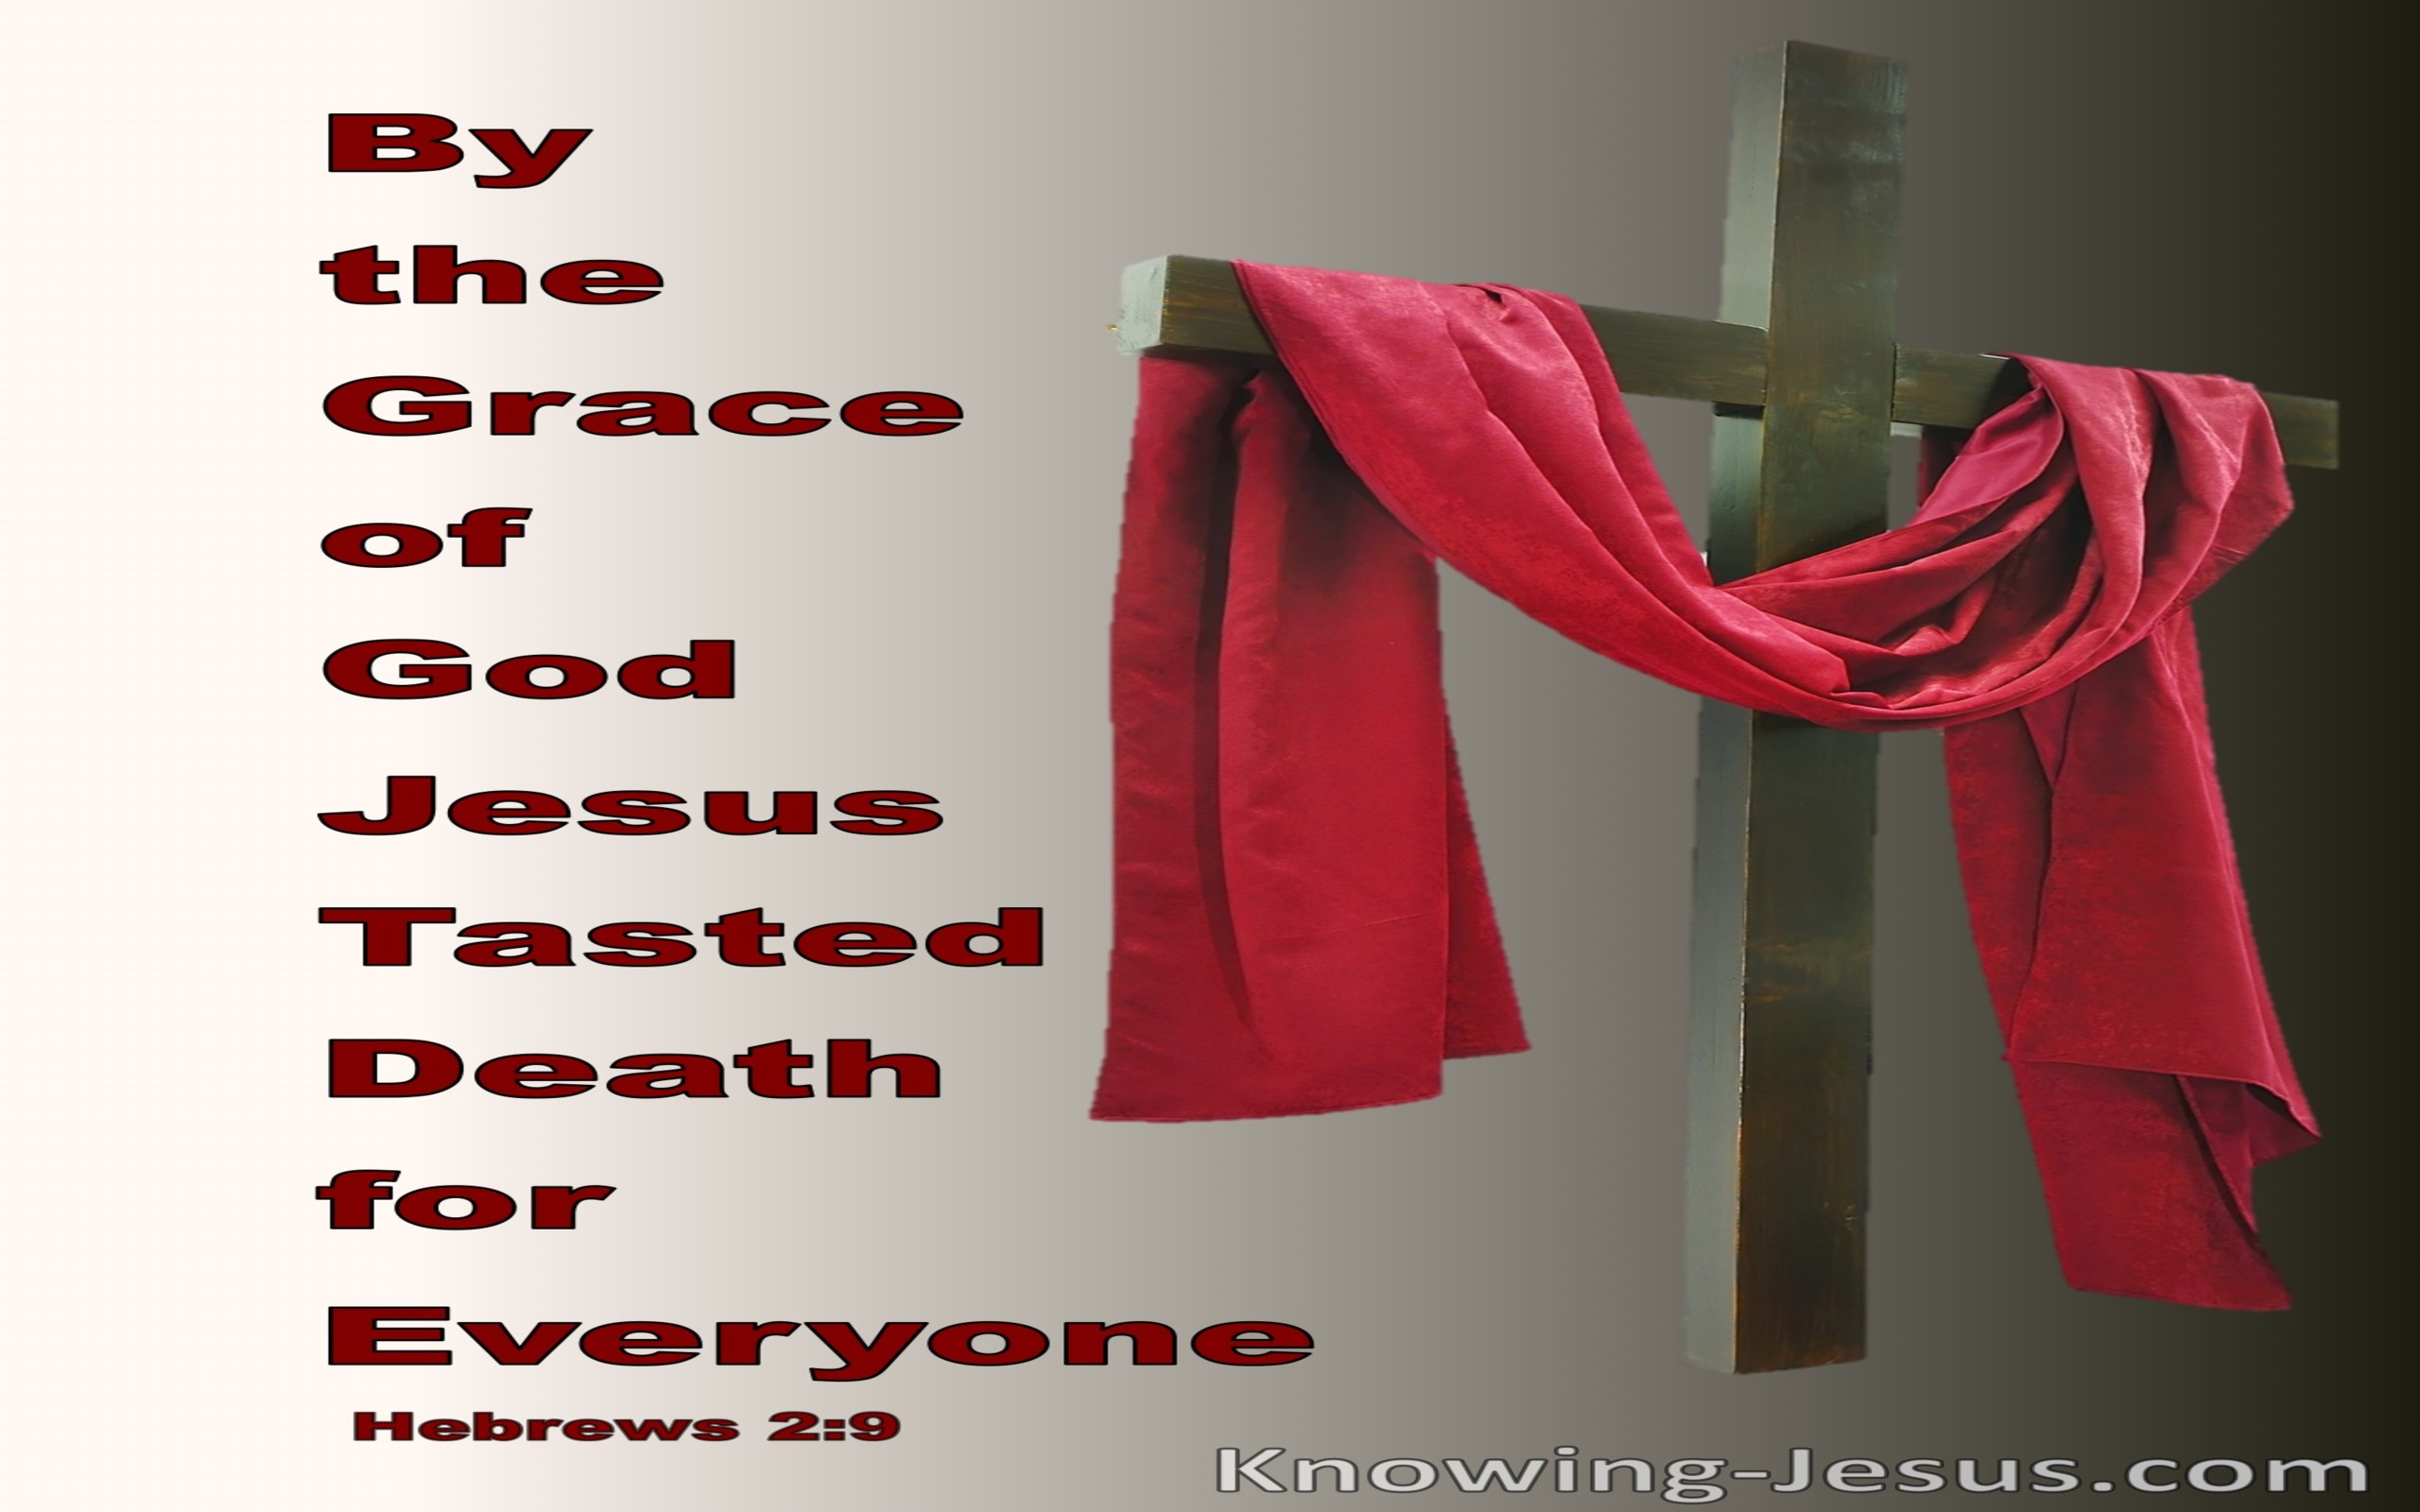 Hebrews 2:9 Jesus Crowned With Glory And Honour (red)